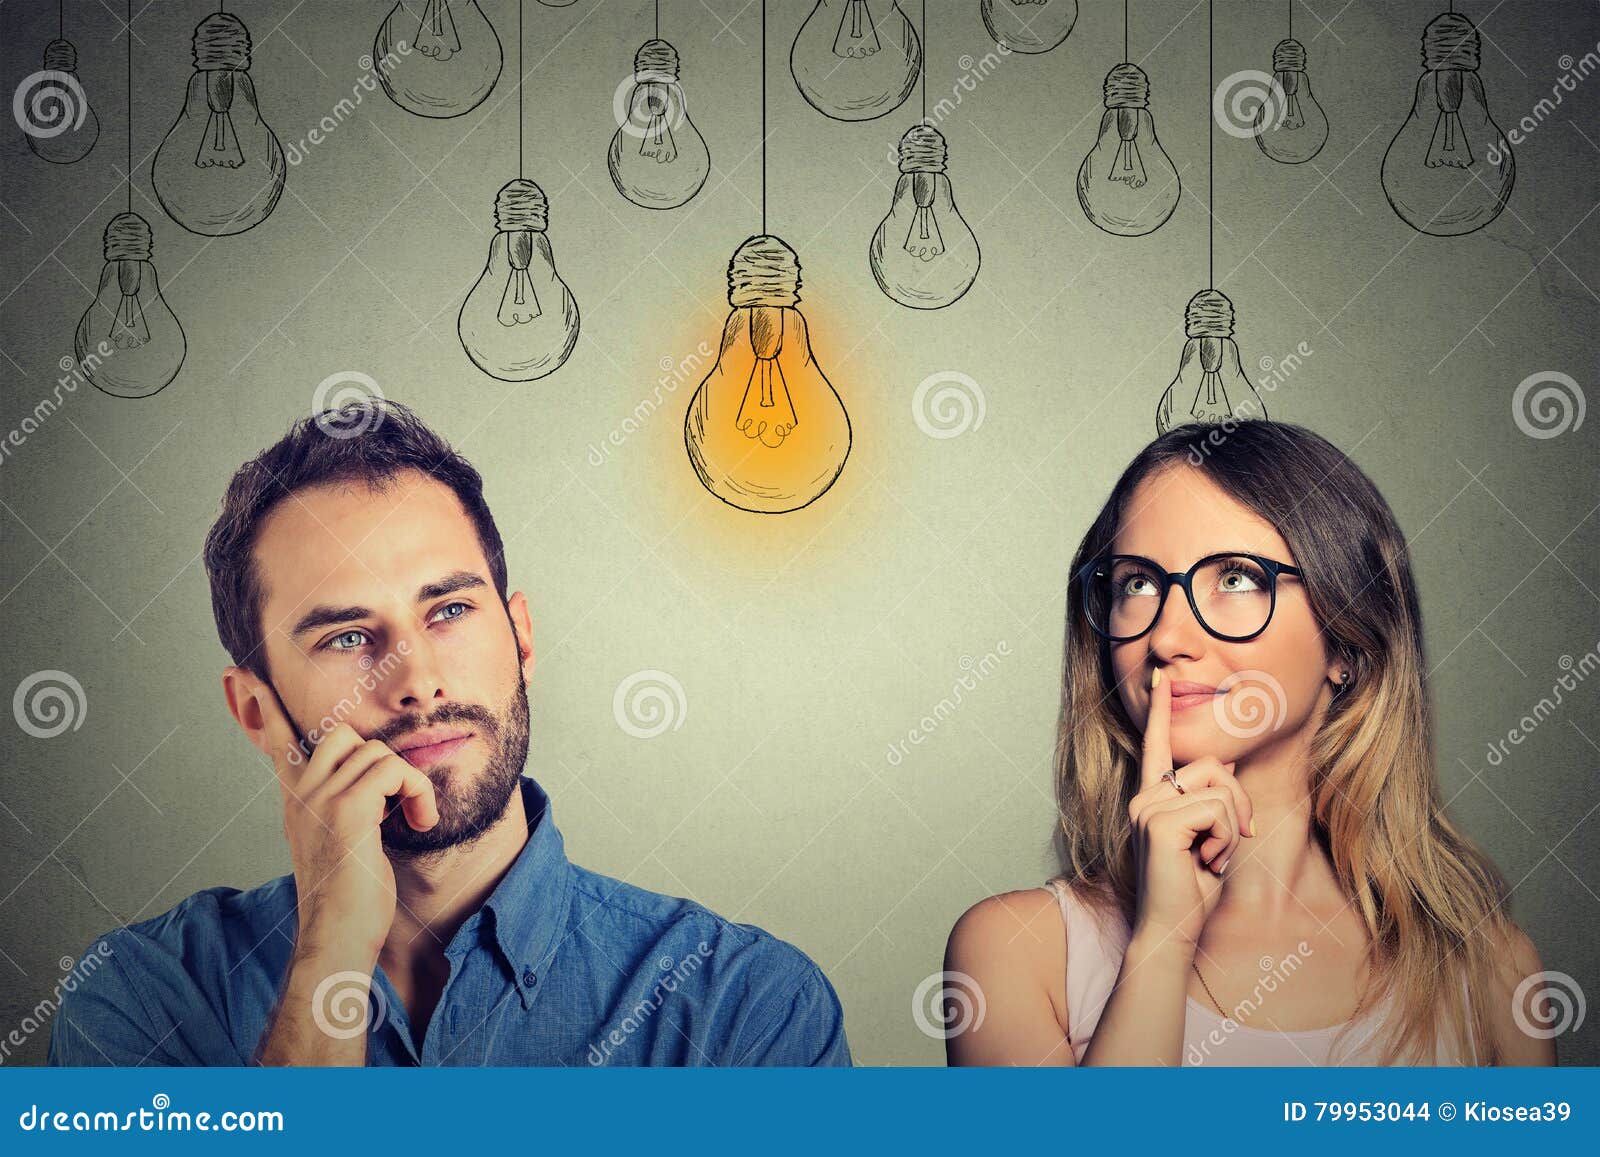 cognitive skills male vs female. man and woman looking at light bulb